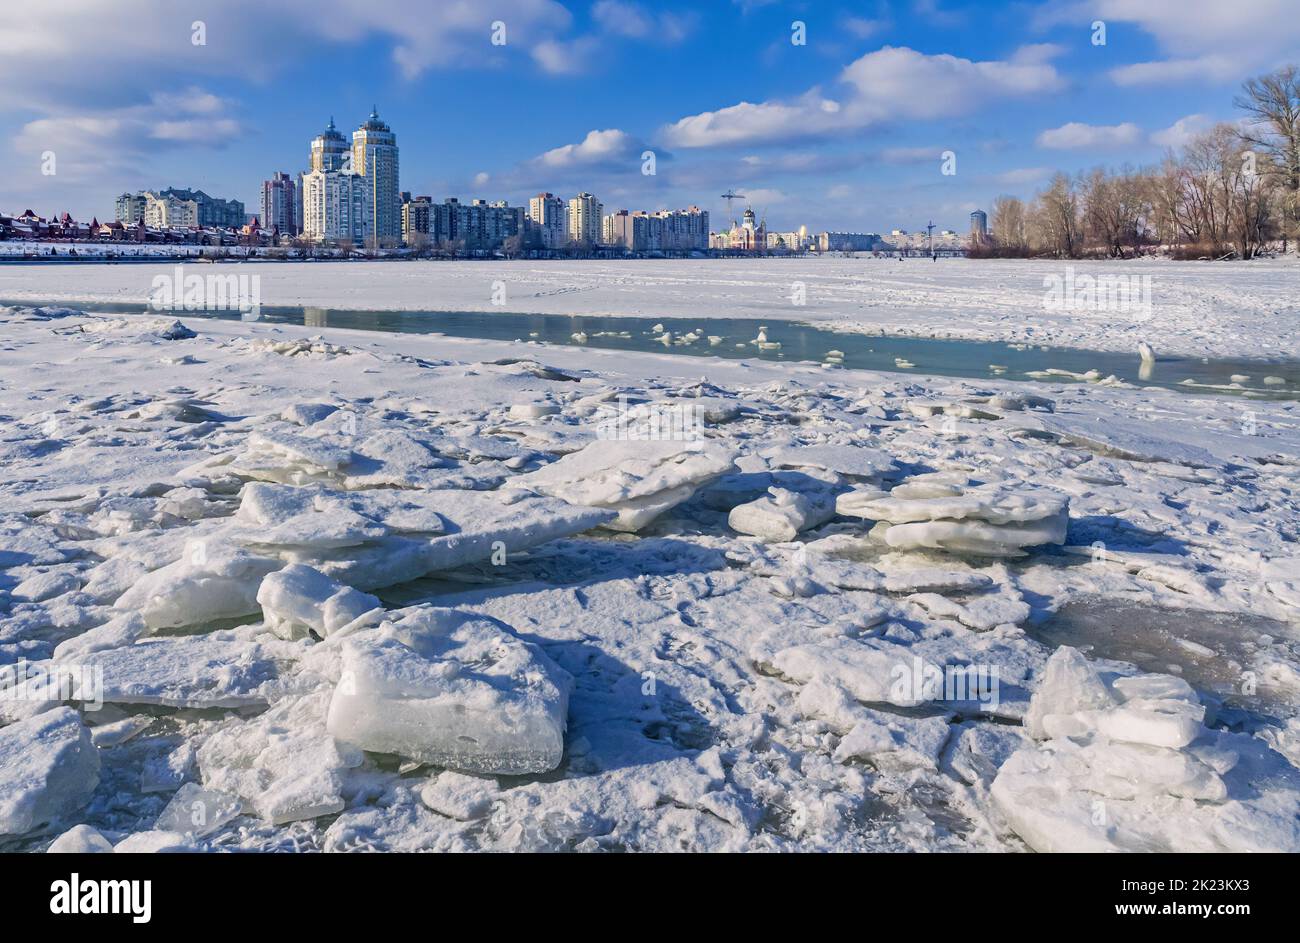 The Dnieper River is covered by ice and snow. The city district of Obolon appears in the background Stock Photo